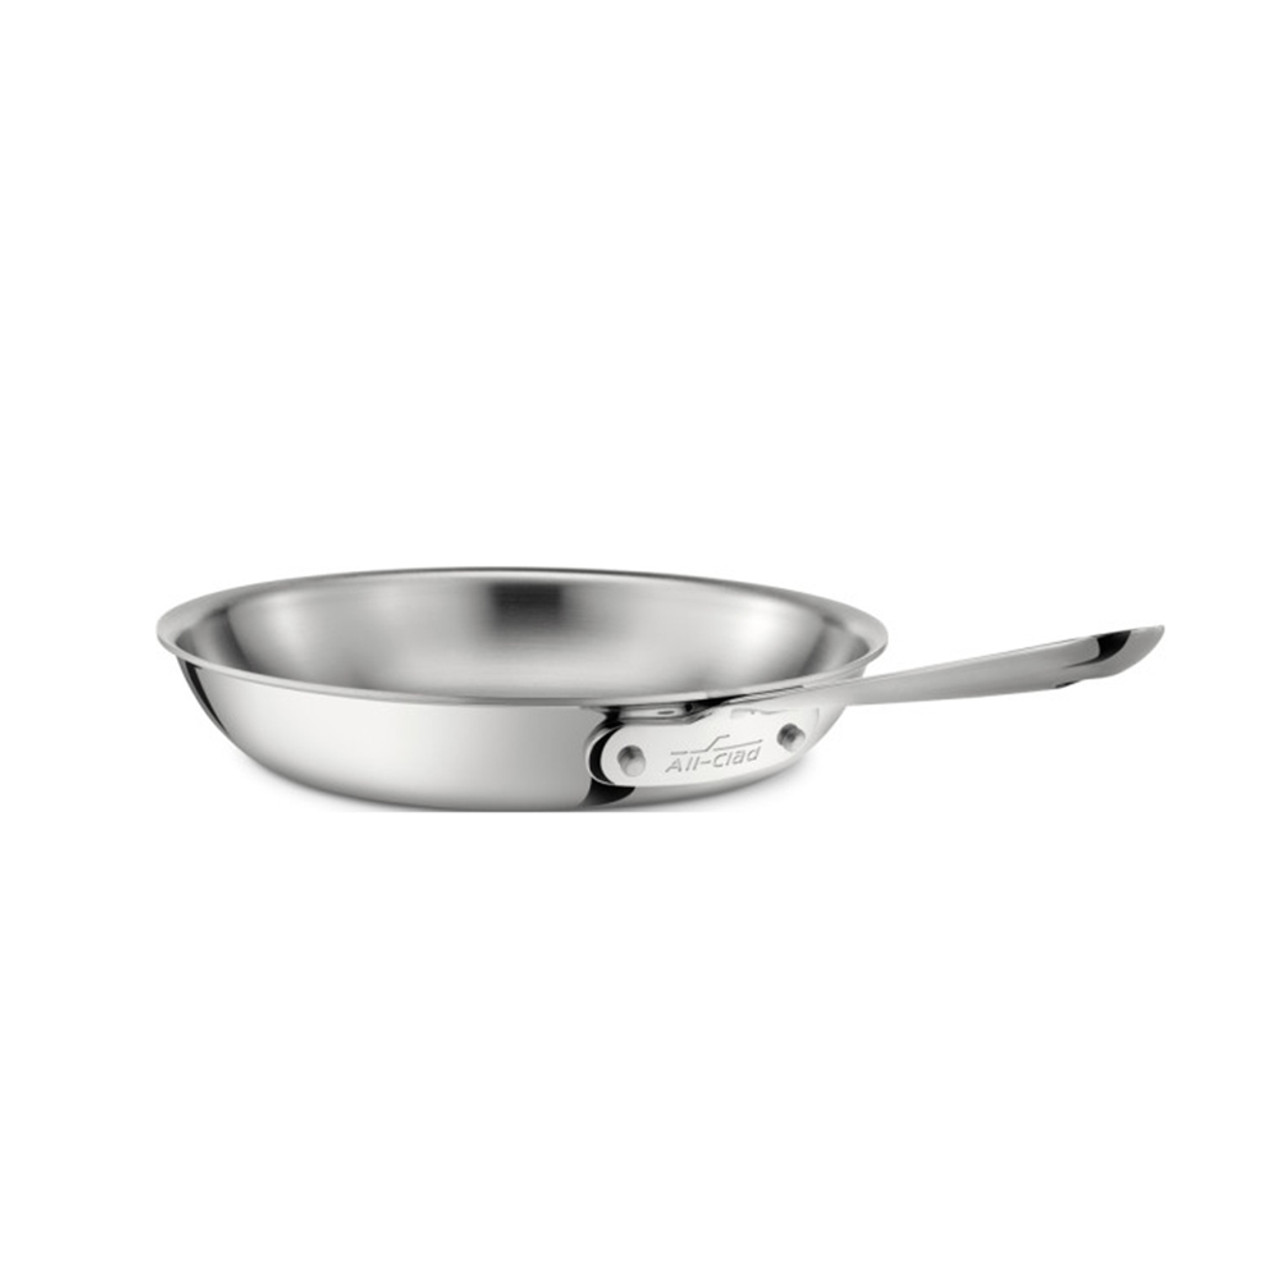 https://cdn11.bigcommerce.com/s-hccytny0od/images/stencil/1280x1280/products/486/1806/all-clad-stainless-steel-fry-pan-8-inch__97759.1510956795.jpg?c=2?imbypass=on